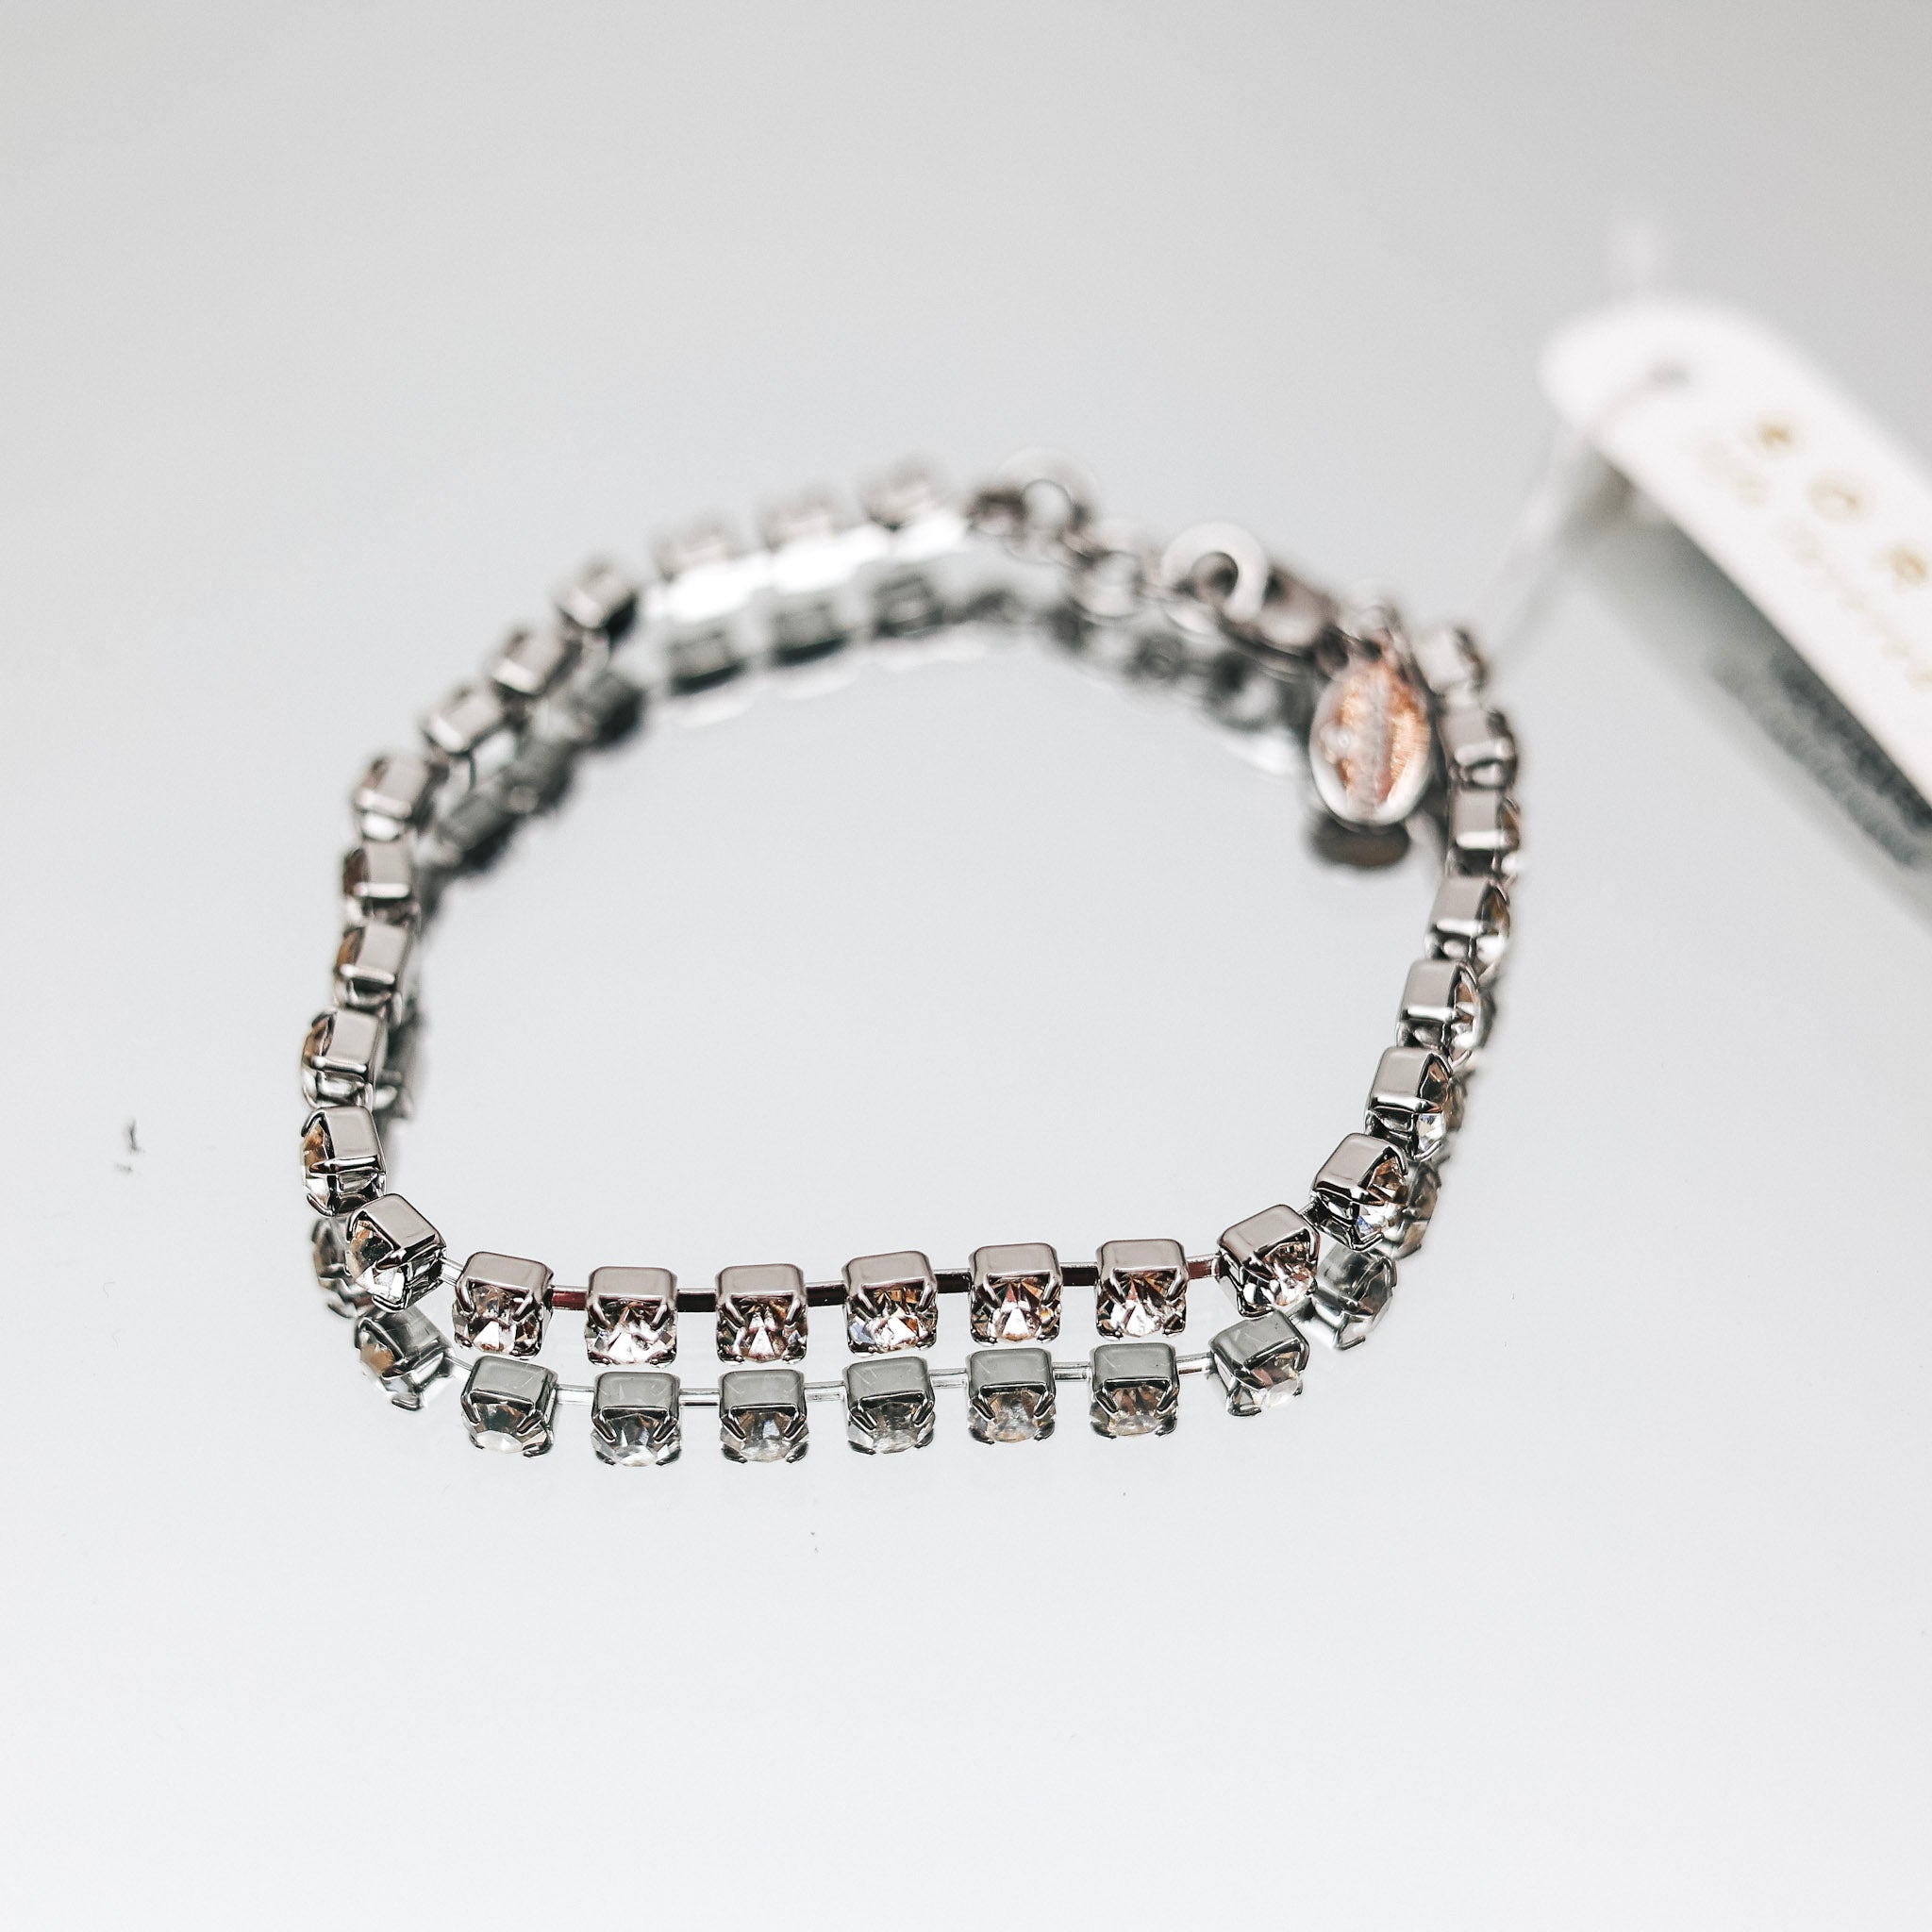 A silver-tone tennis bracelet with small clear square cut crystals pictured on a mirror.